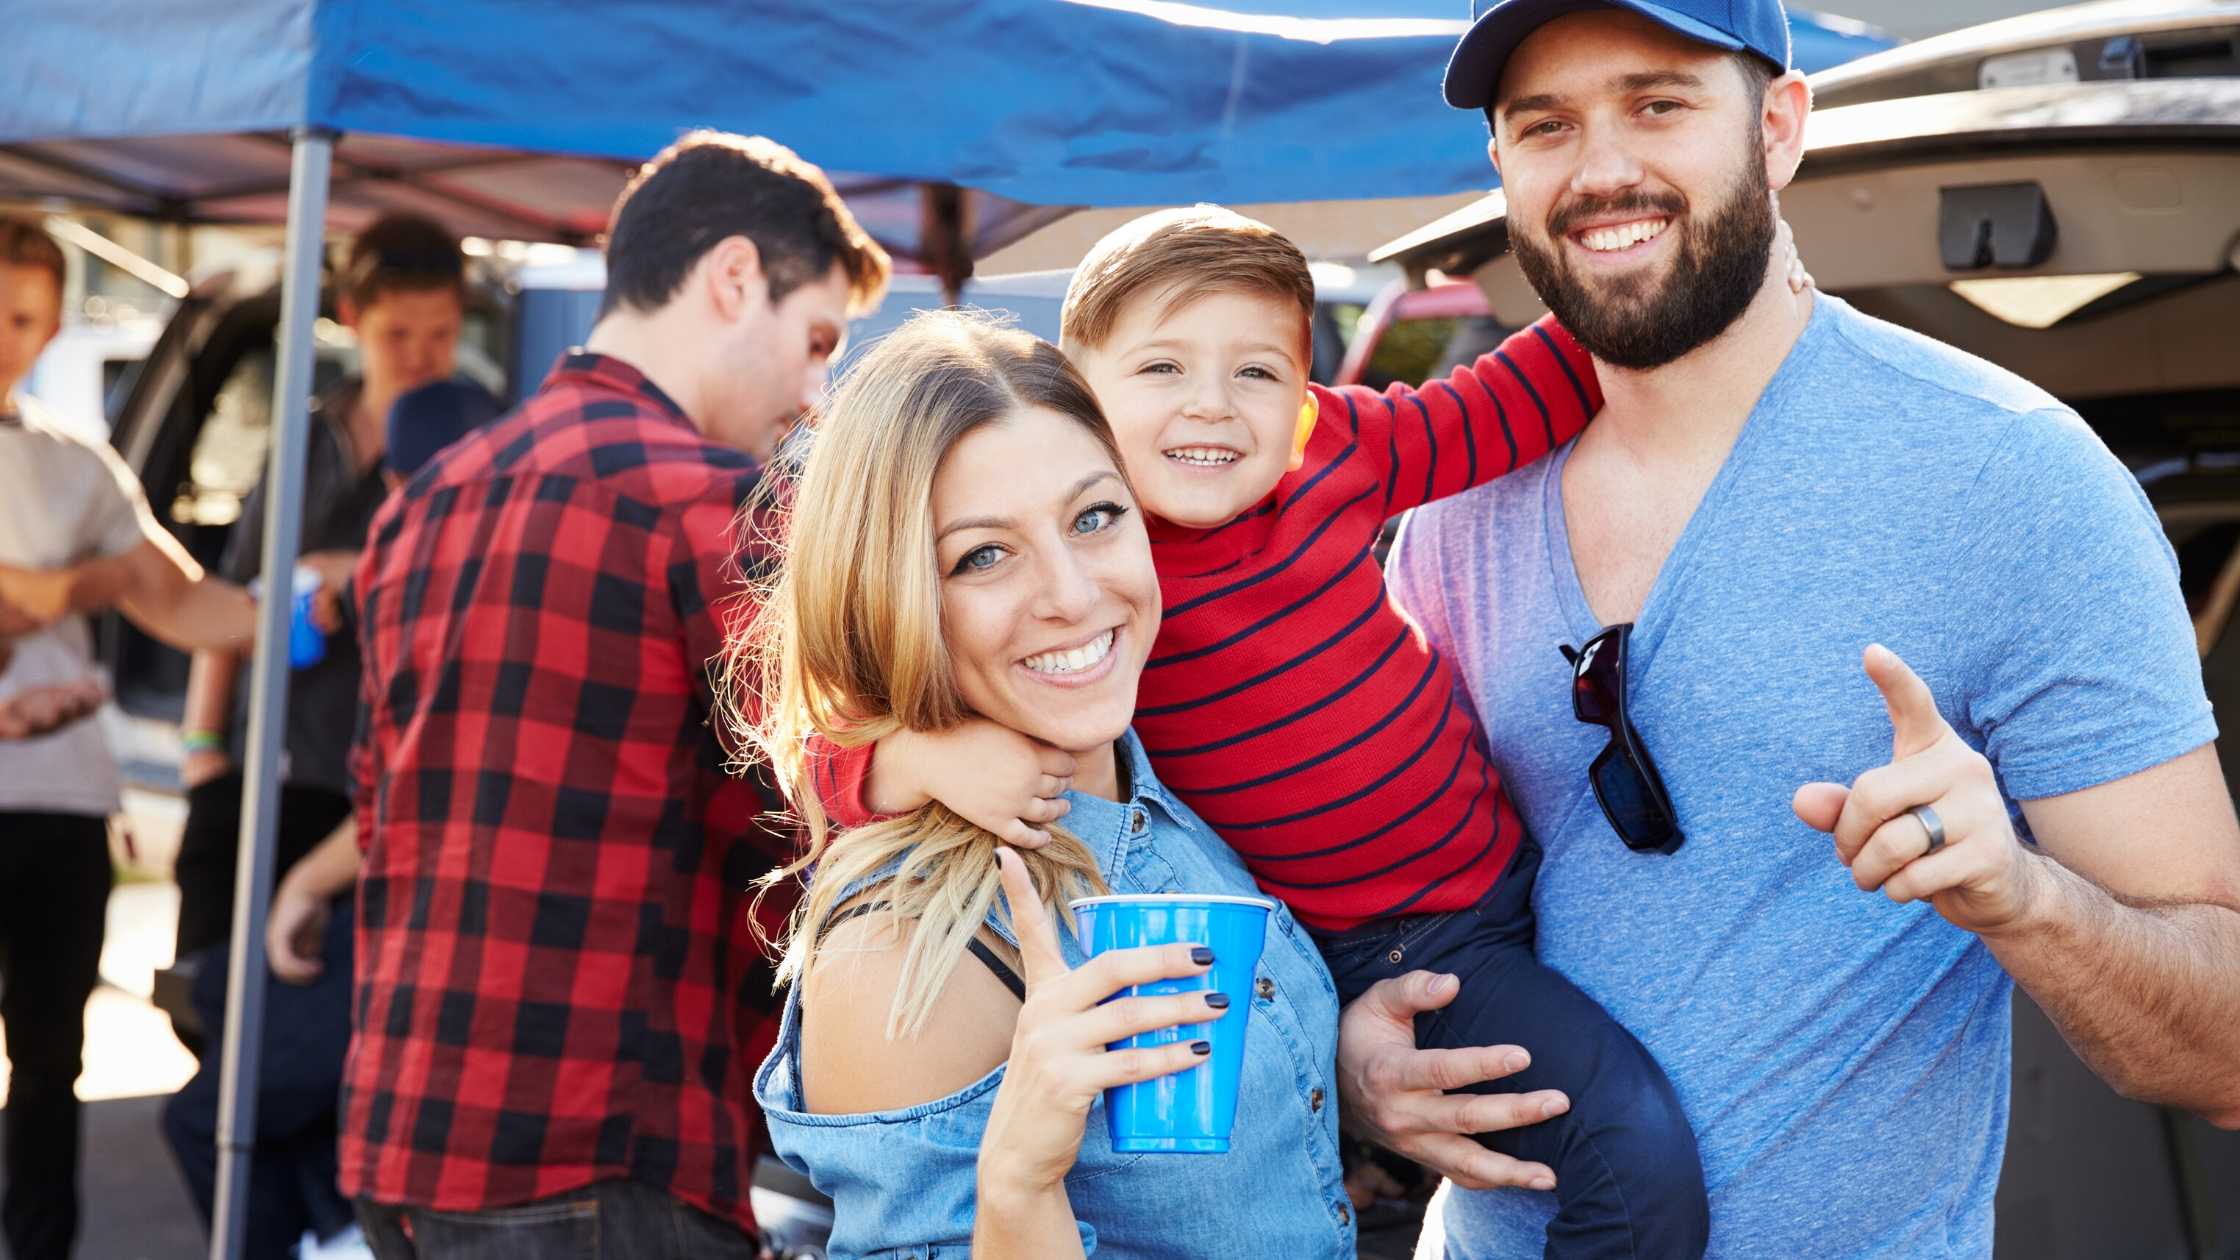 The 10 Best Father’s Day Gifts for the Tailgating Dad in 2020 3